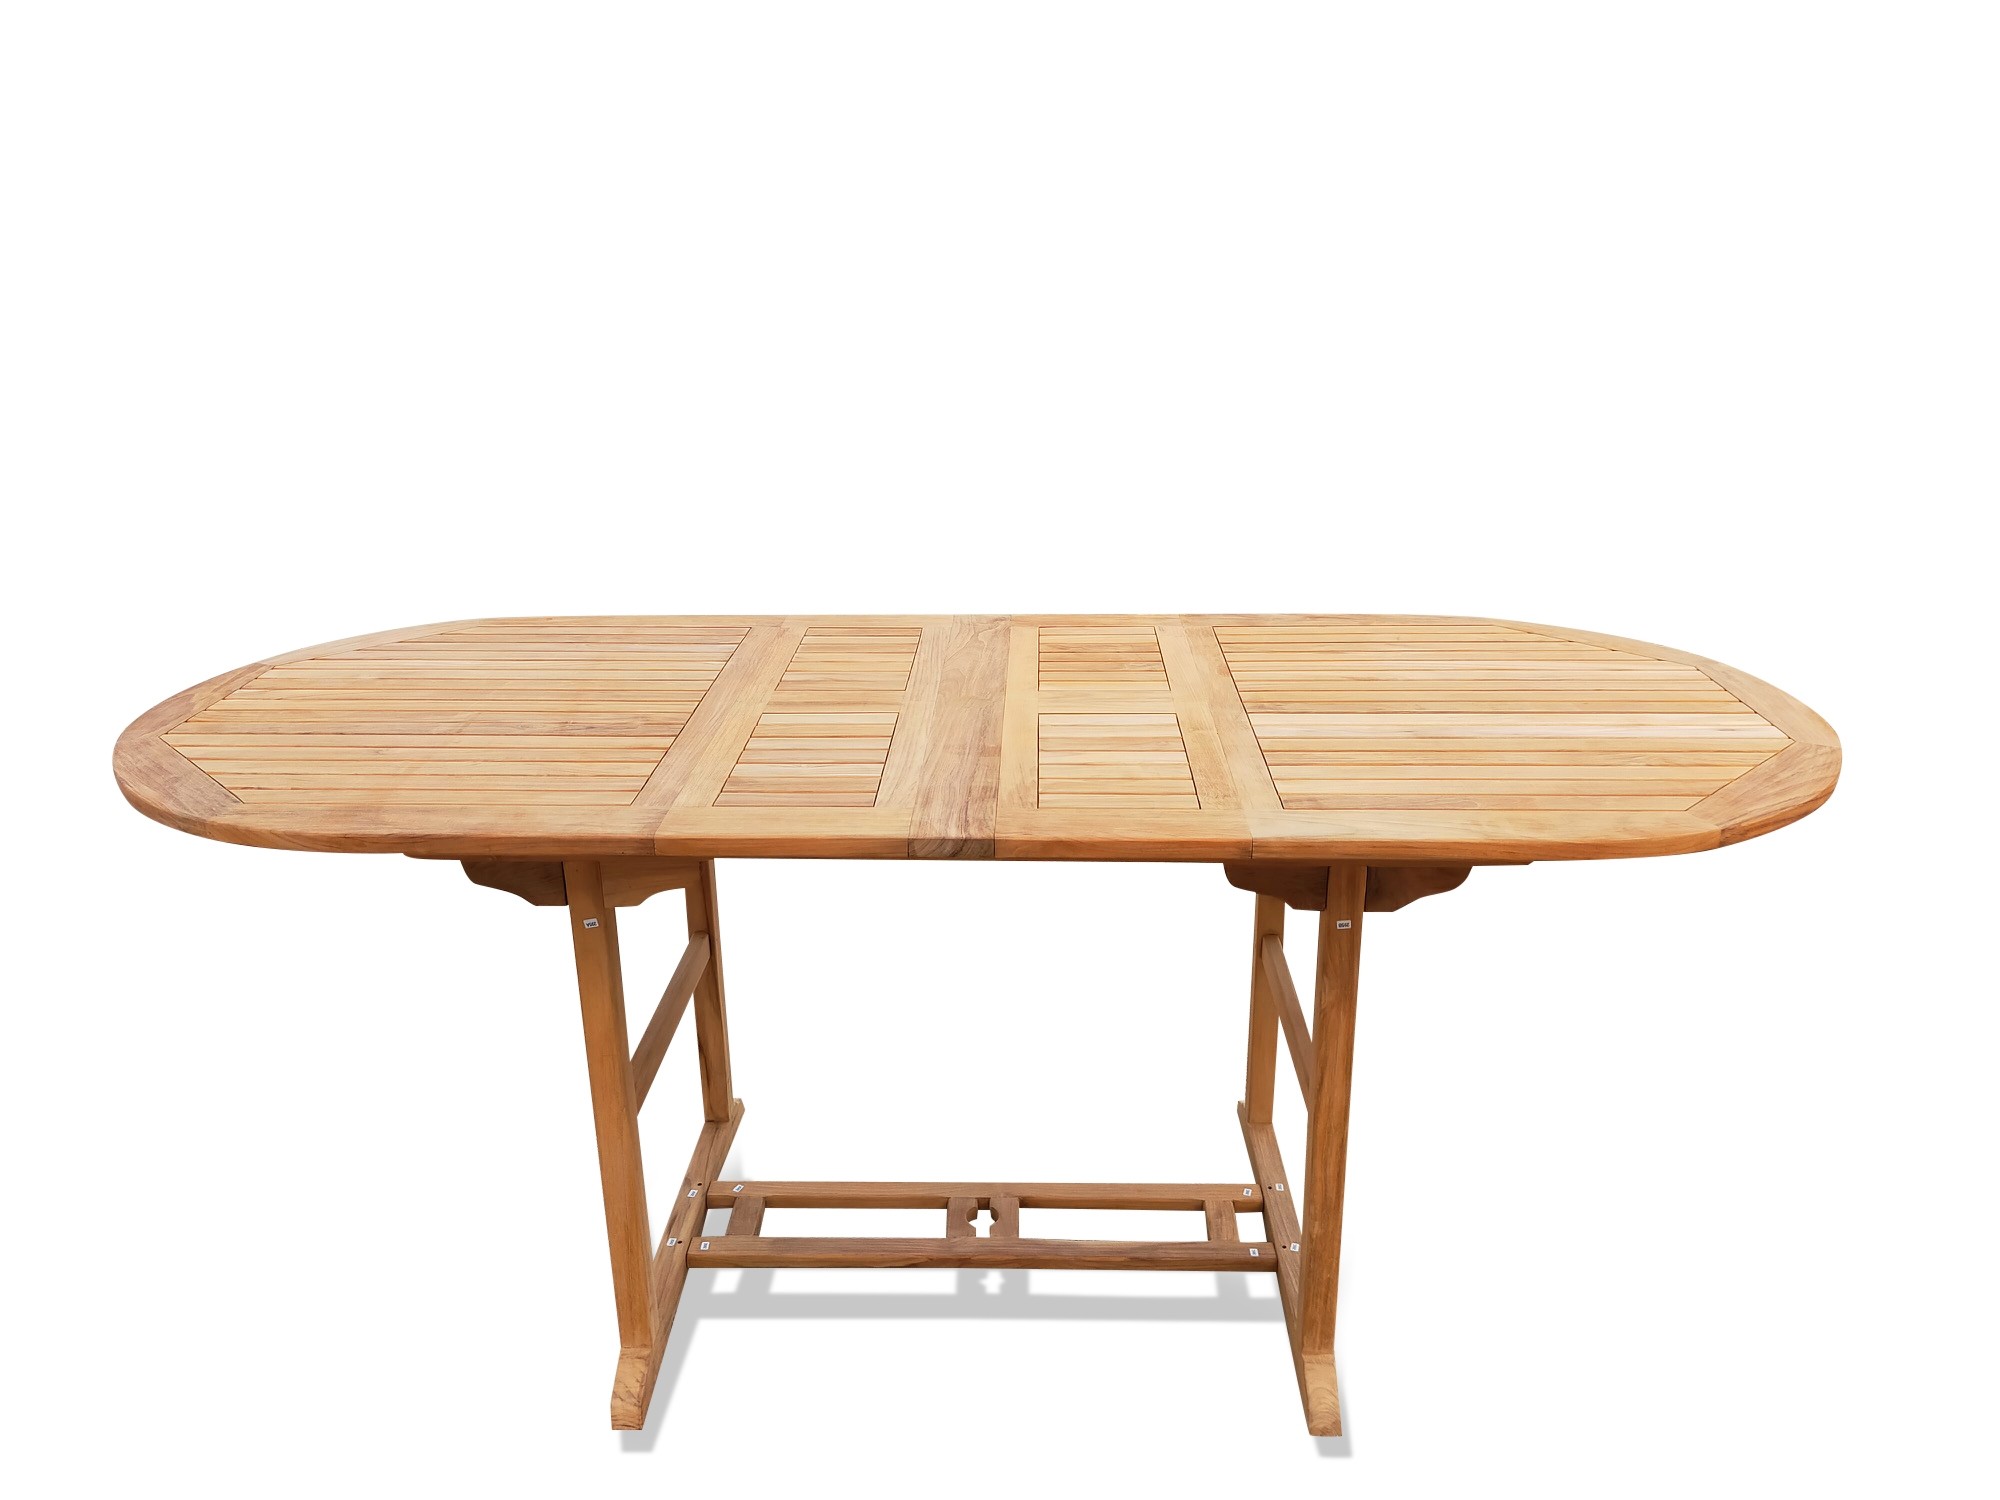 Bimini Counter Height 95" x 39" Double Leaf Oval Extension Table...Seats 8-10...makes 3 Different Size Tables